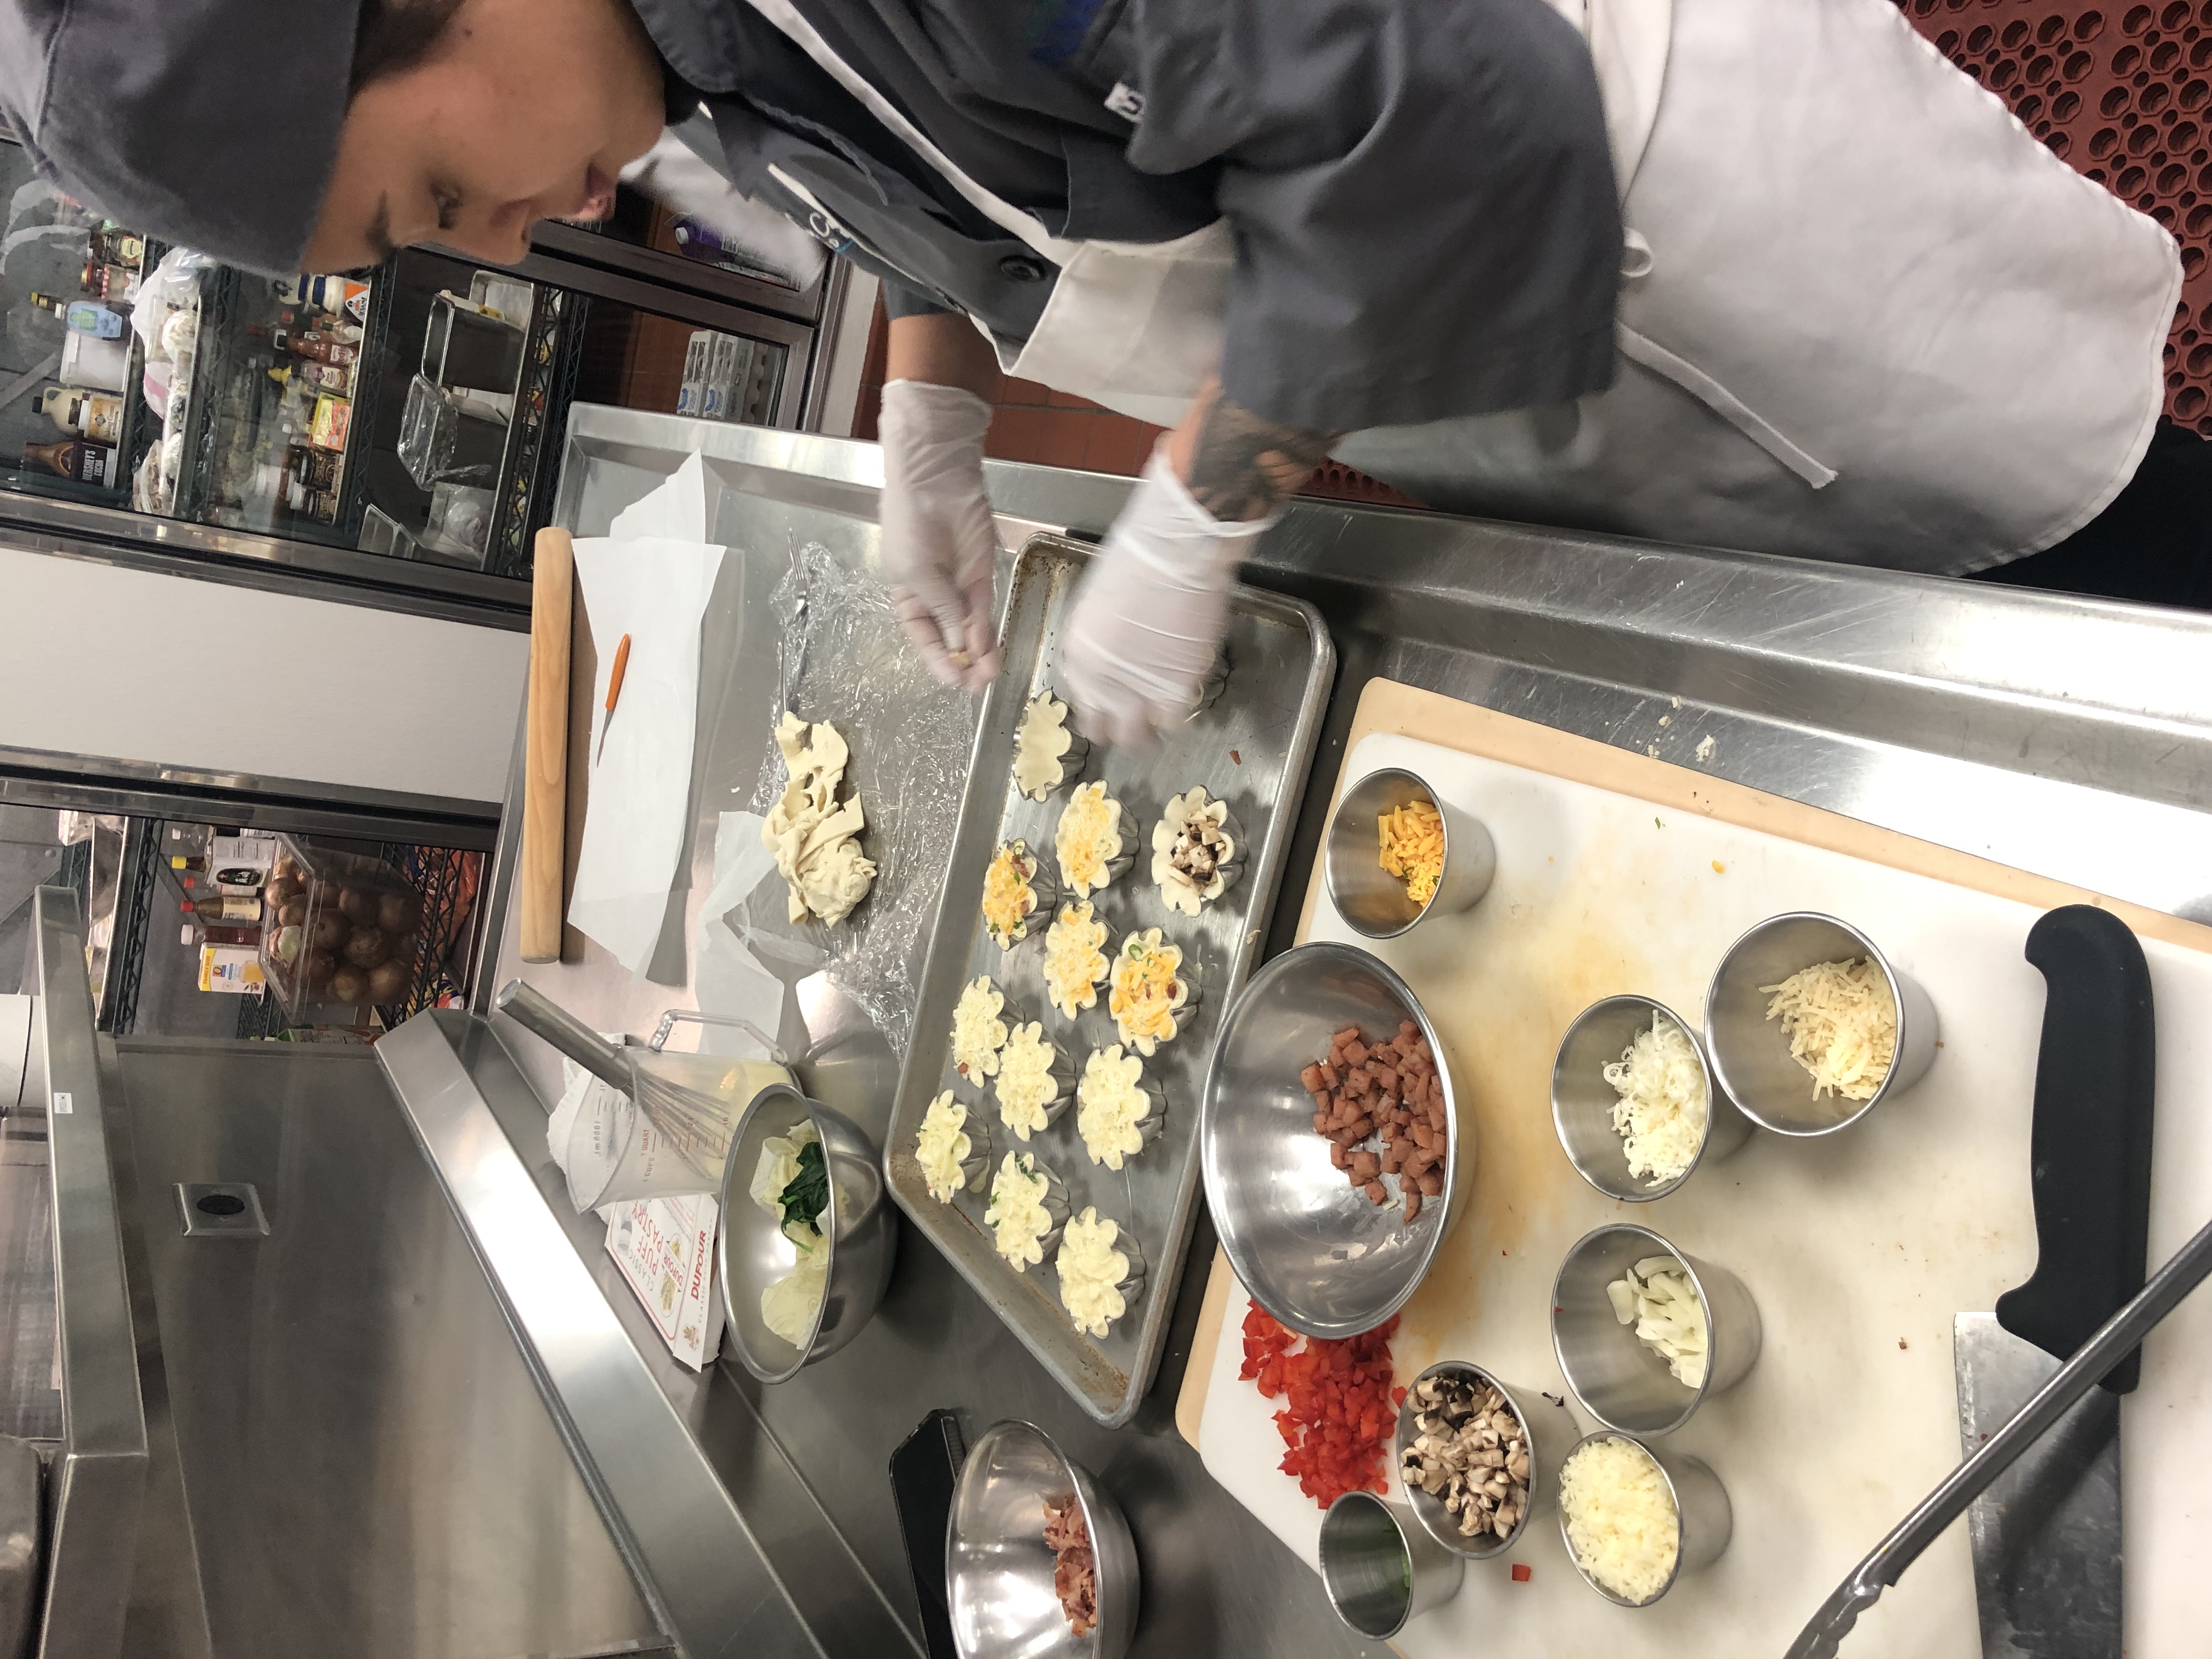 Culinary arts student preparing food in the kitchen